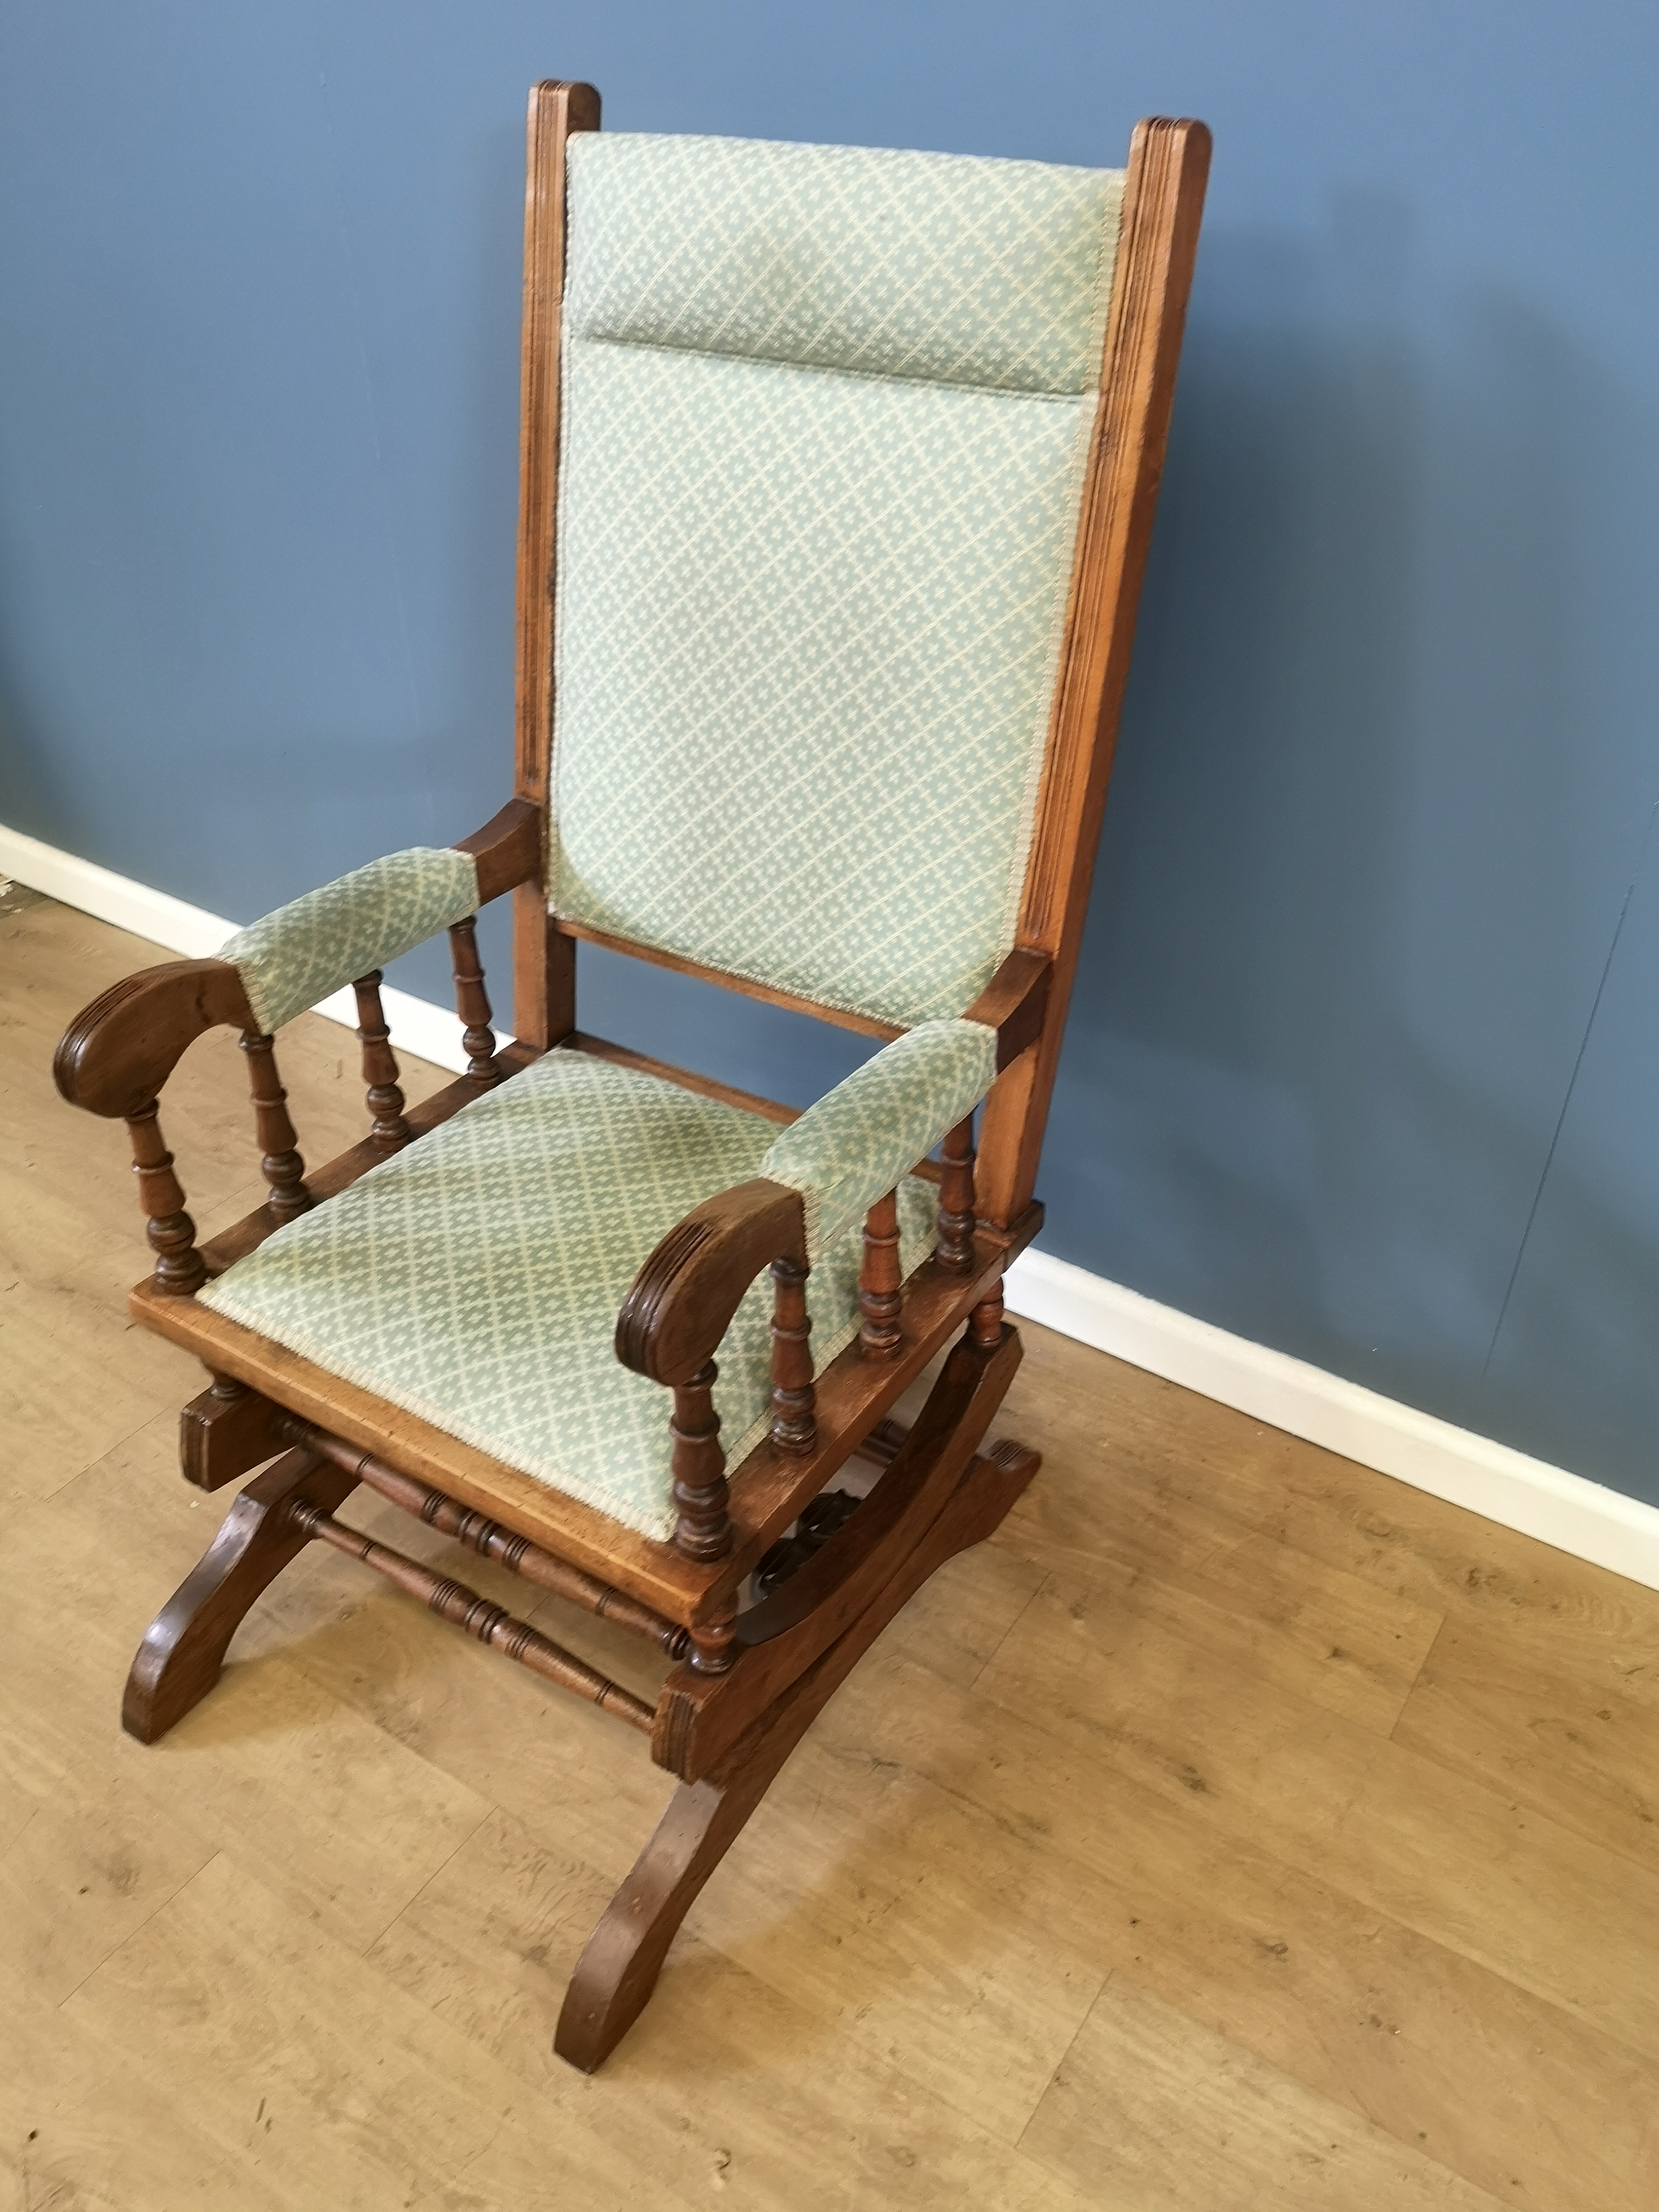 American style rocking chair - Image 3 of 3